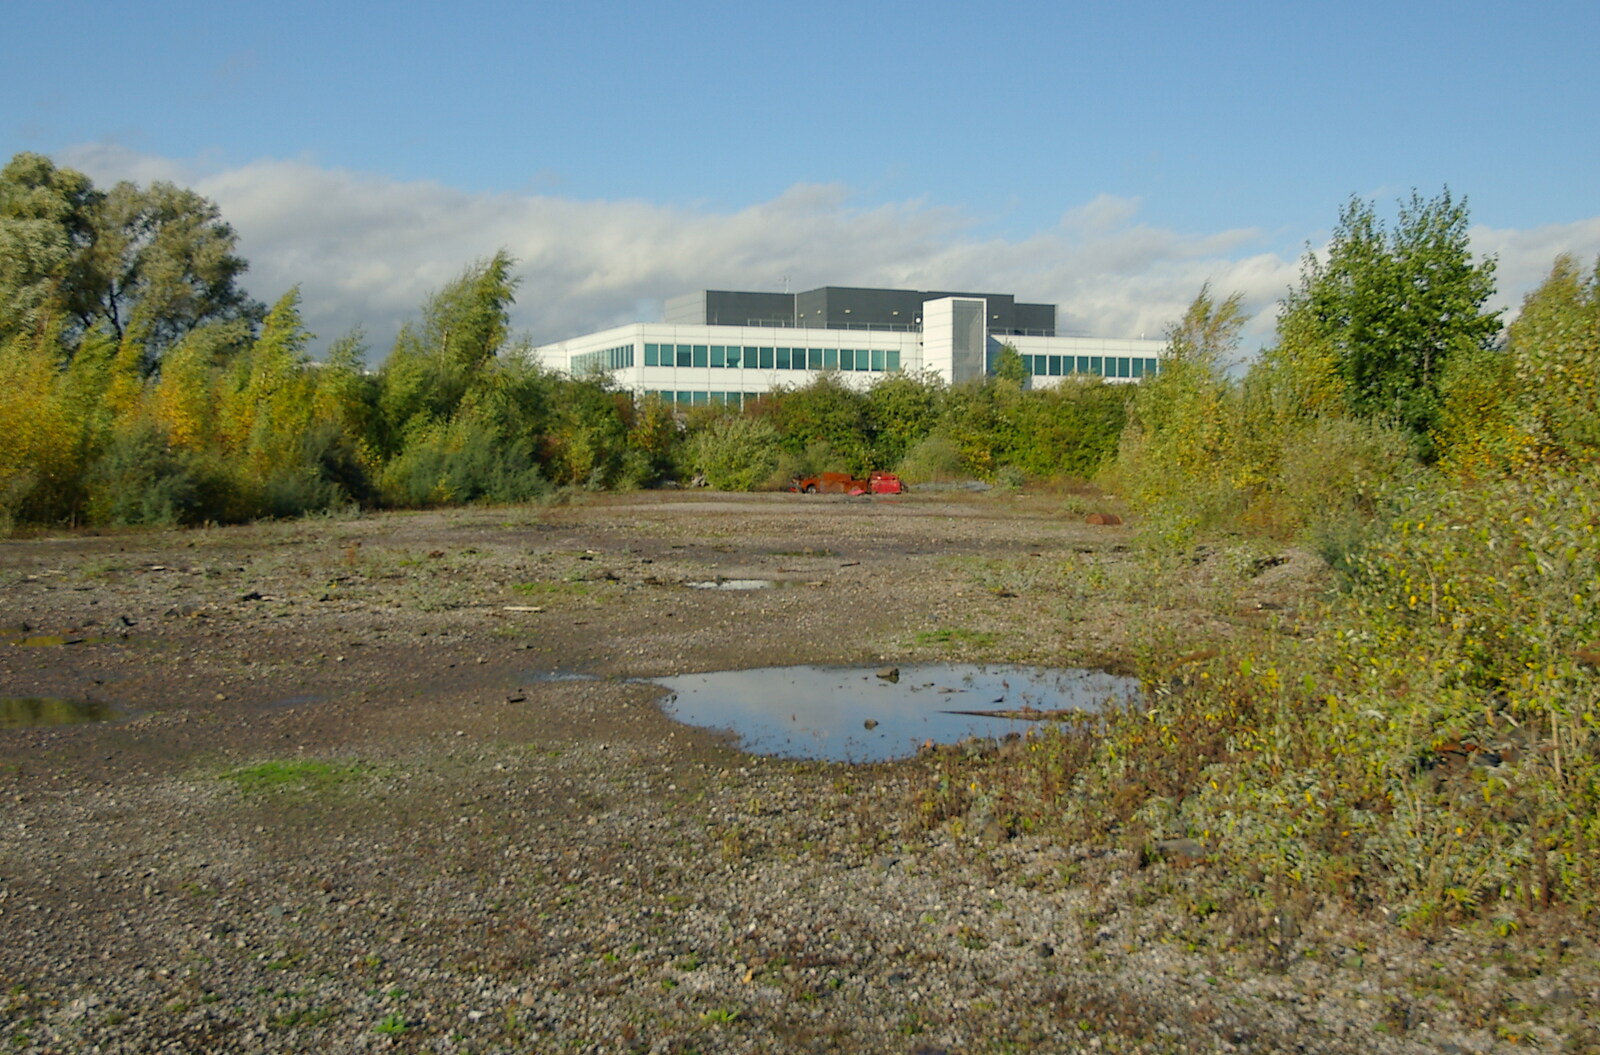 Disused Cambridge Railway, Milton Road, Cambridge - 28th October 2005: The back of the Business Park